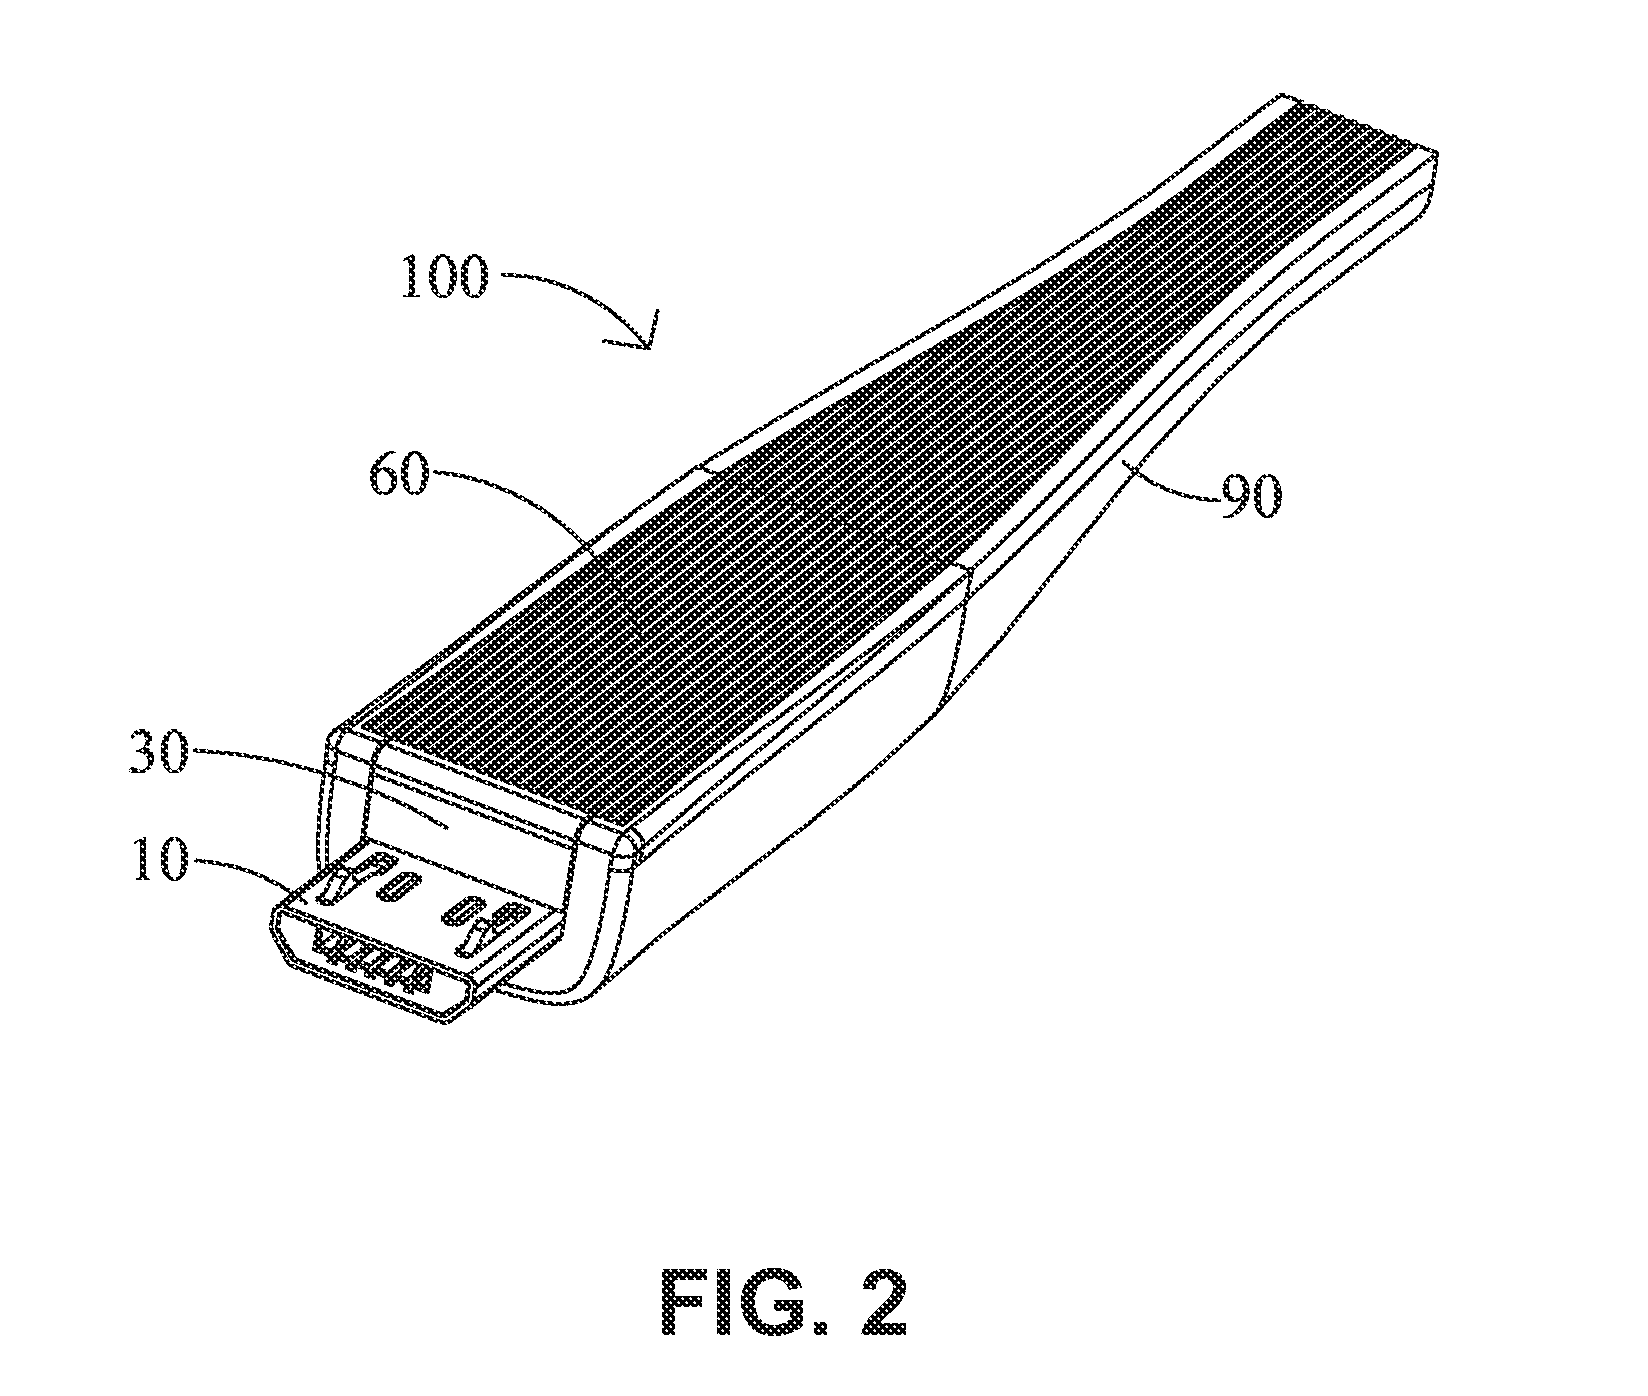 Electrical connector assembly with a light guide member